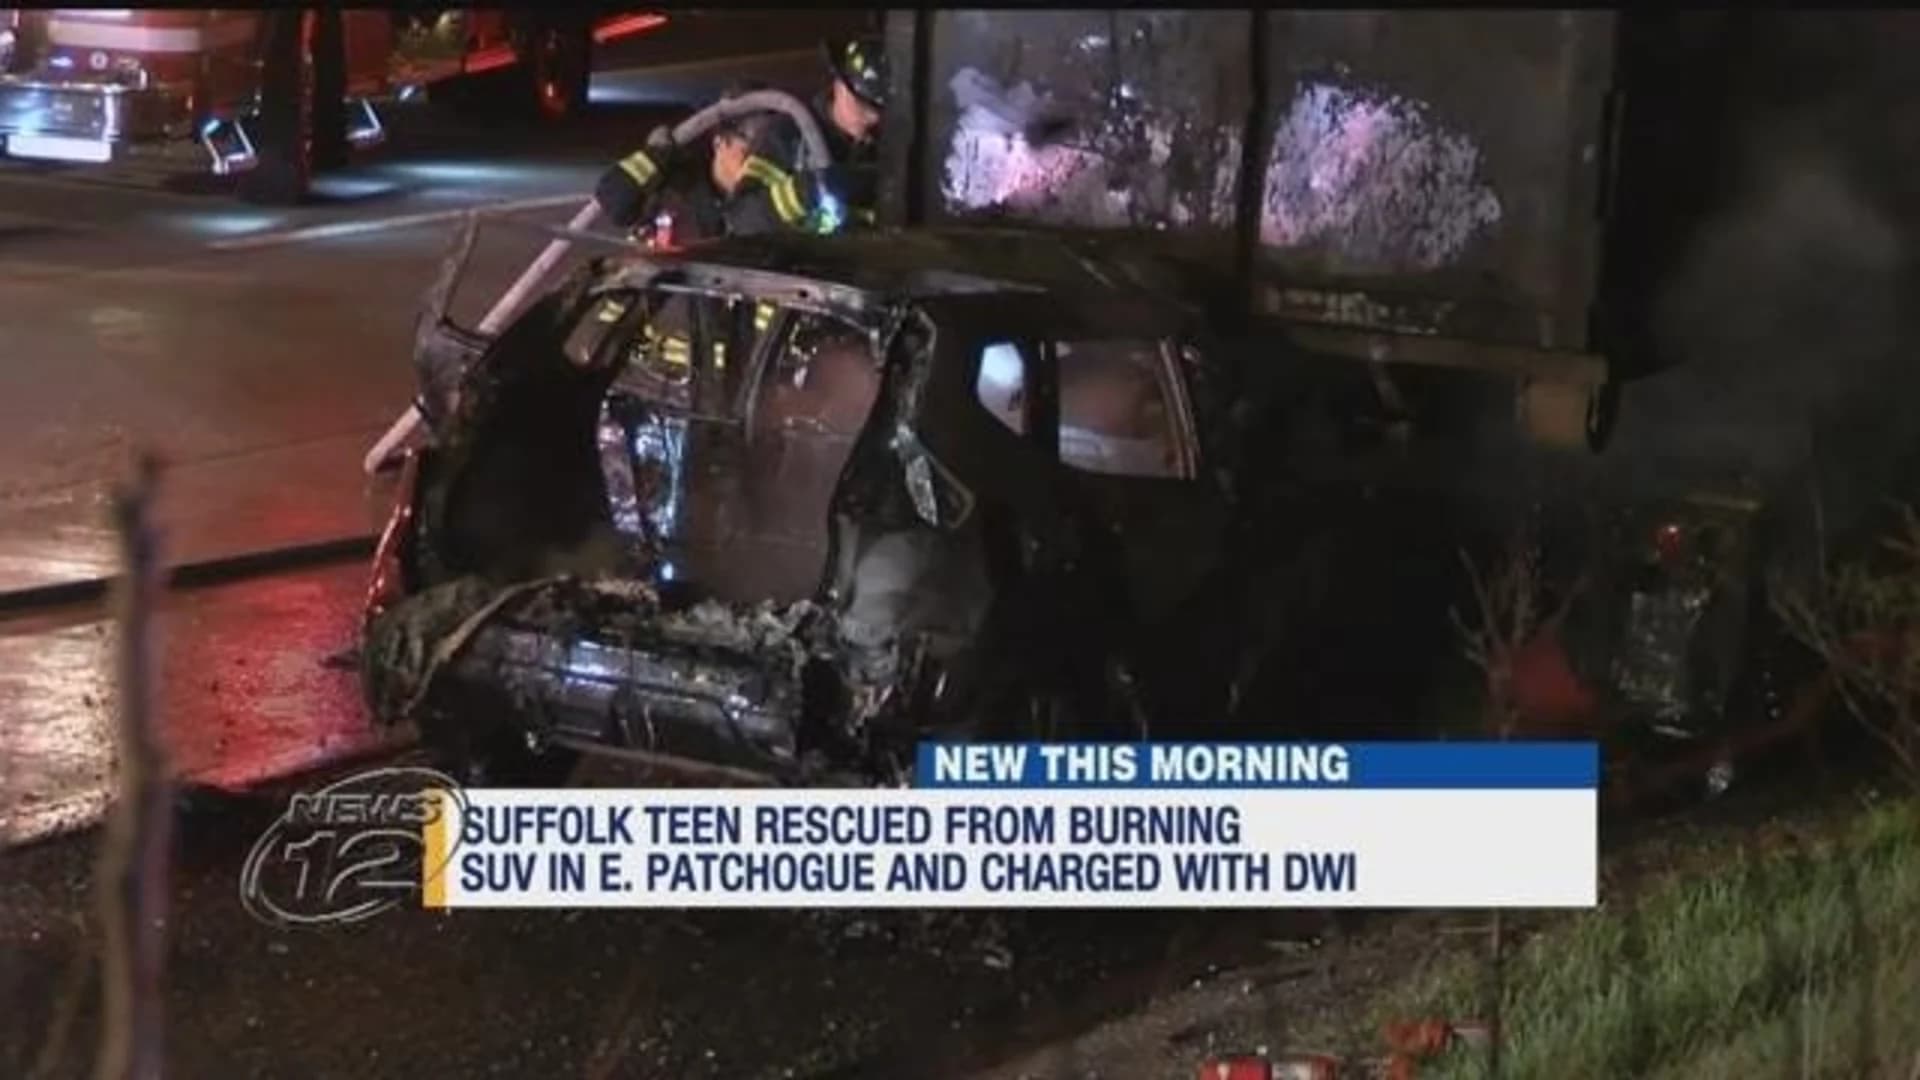 Teen rescued from burning SUV, charged with DWI